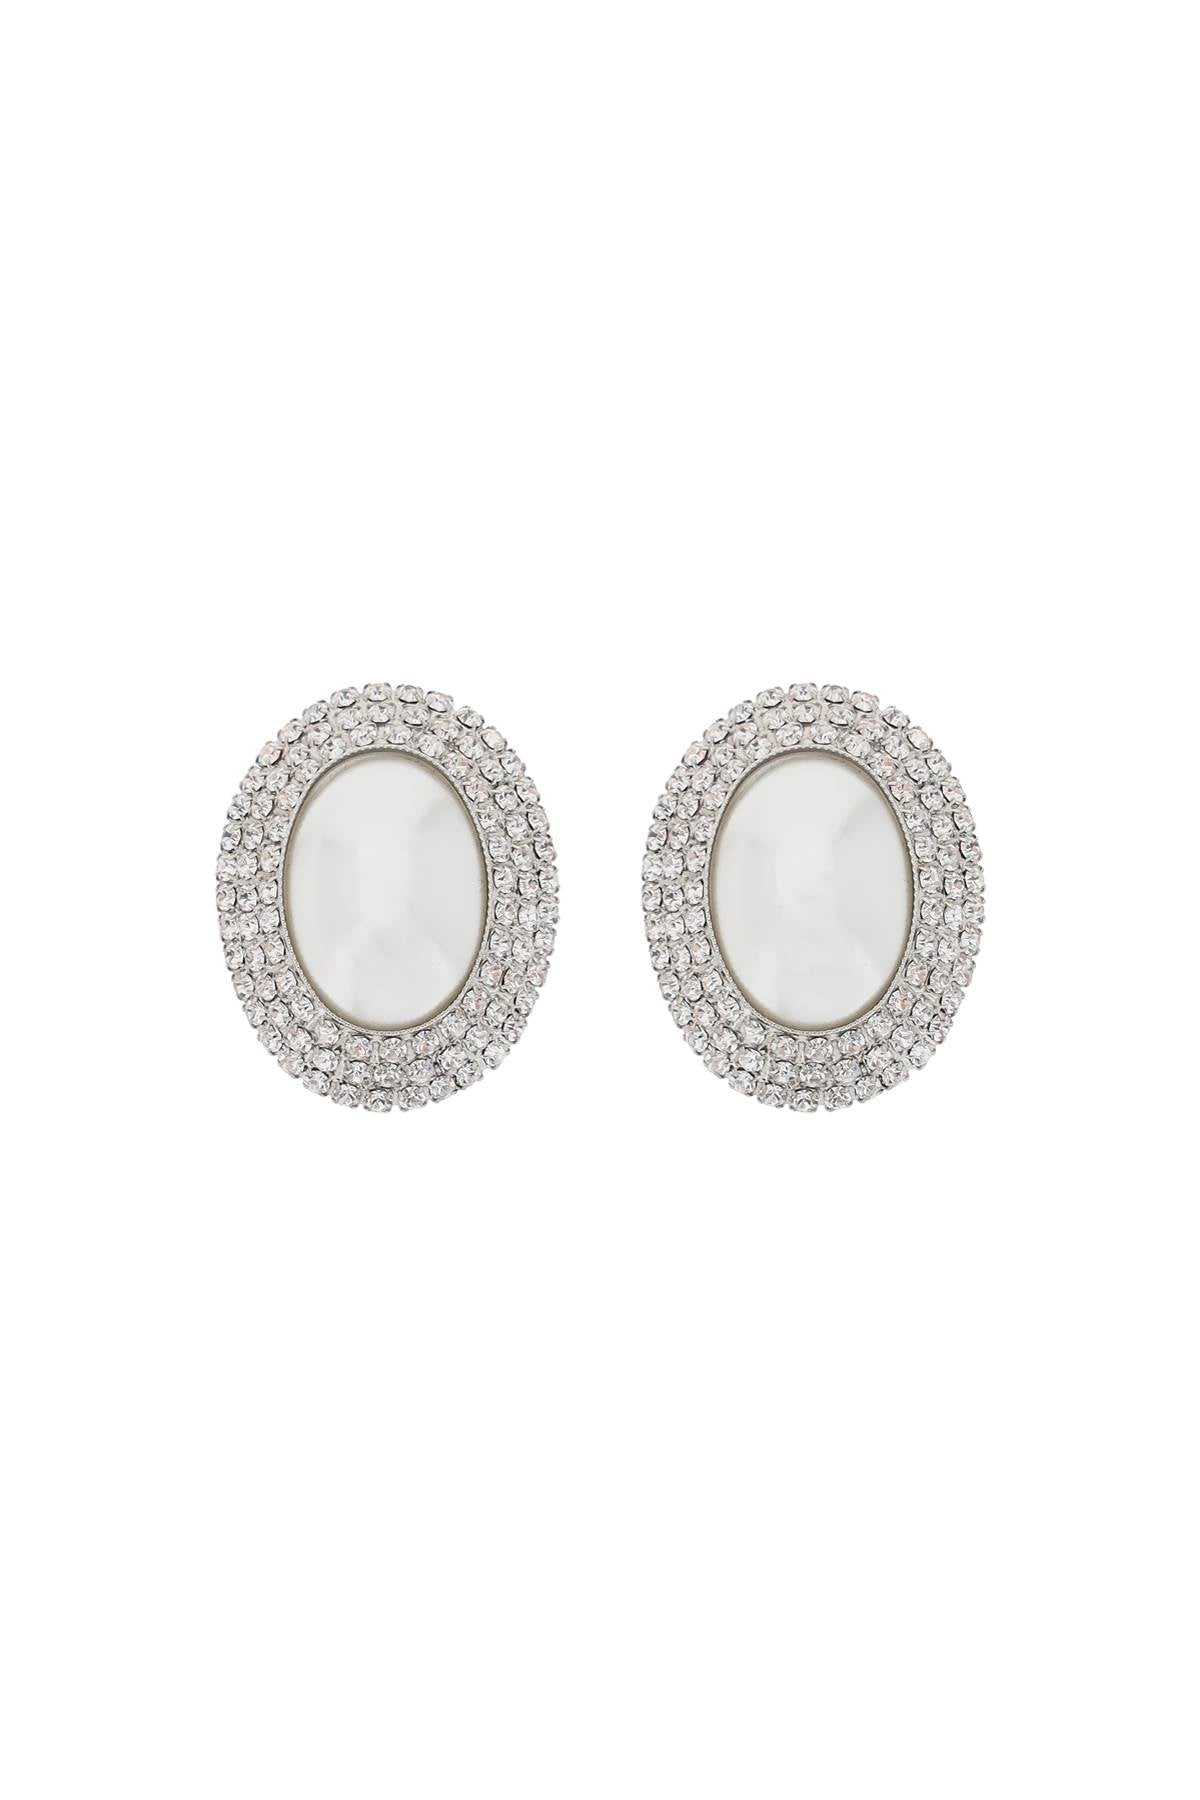 Alessandra rich oval earrings with pearl and crystals-1